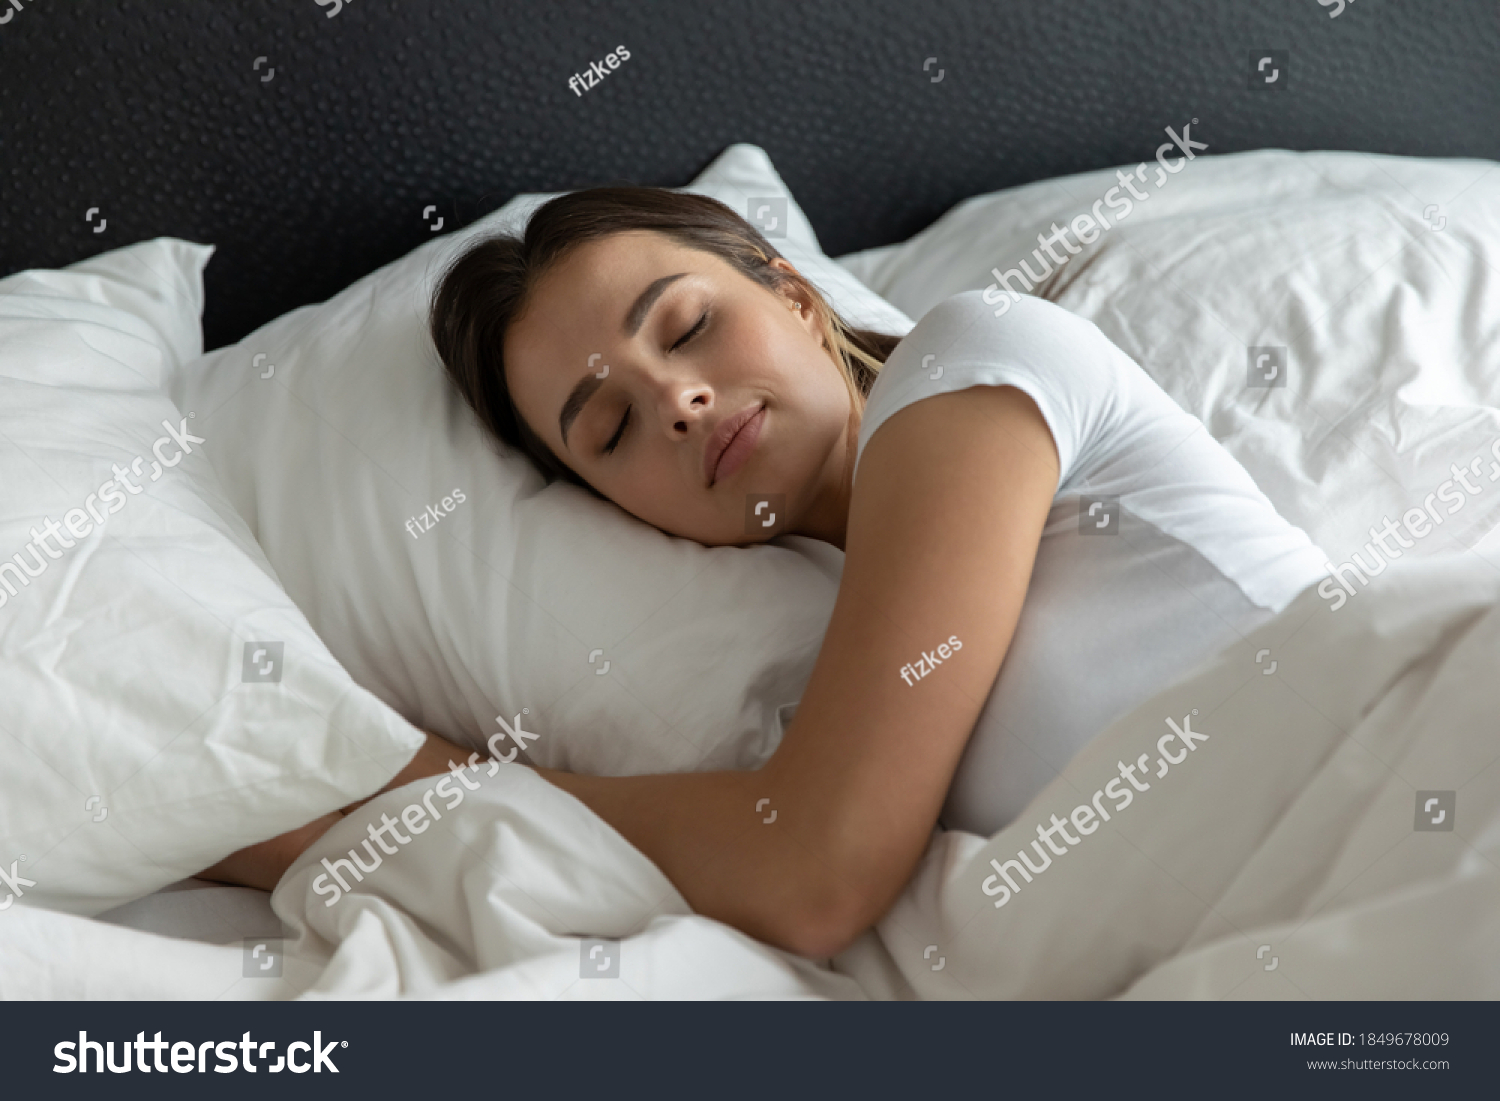 Sweet dreams. Relaxed young female sleeping in large cozy bed at home or in hotel suite room on clean white bedclothing hugging soft pillow covered with warm blanket dreaming resting having pleasure #1849678009